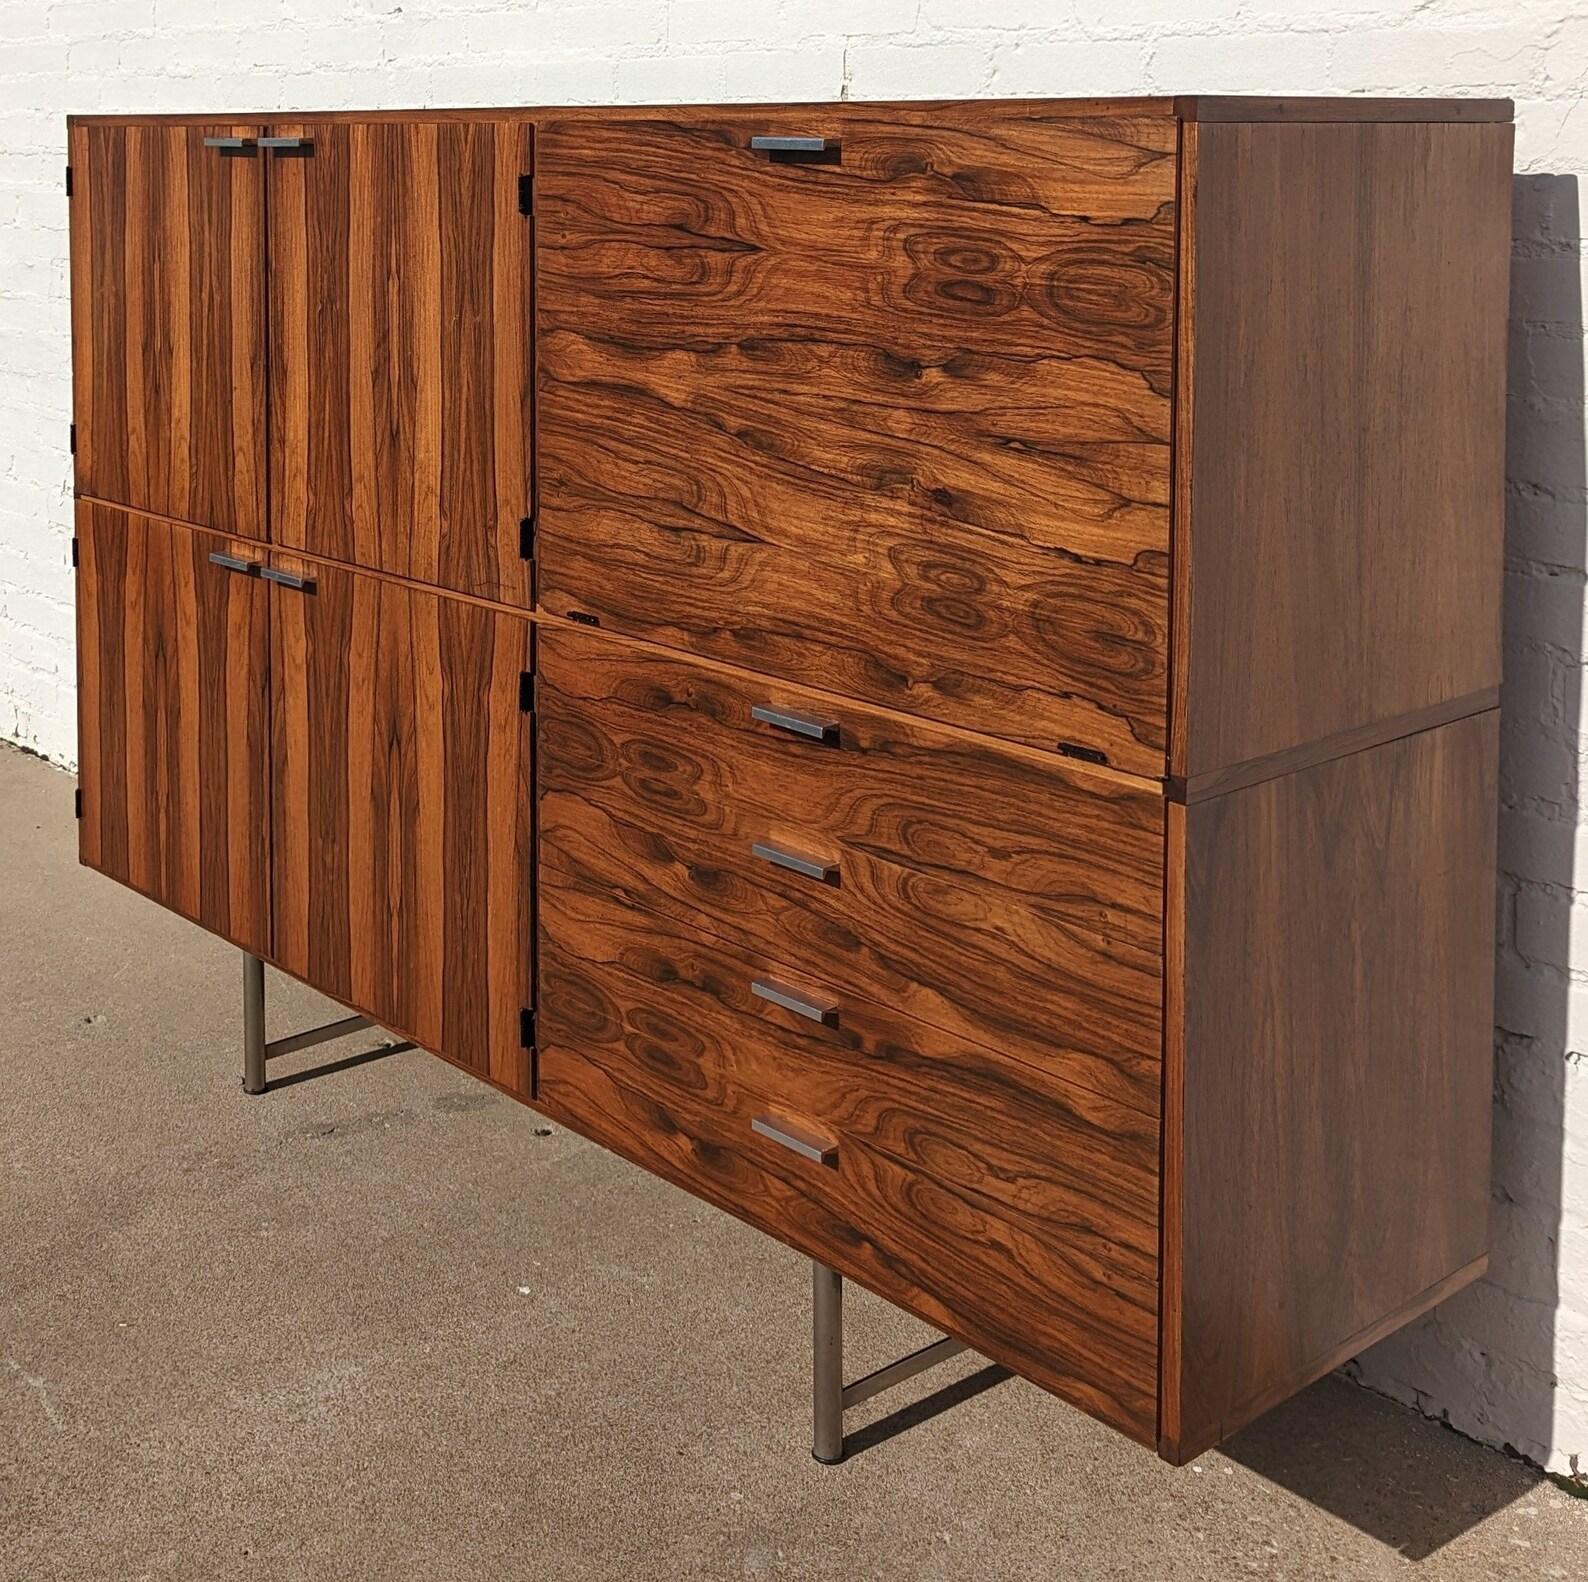 Mid Century Danish Modern Cees Braakman Cabinet

Above average vintage condition and structurally sound. Has some expected slight finish wear and scratching. Has a couple veneer chips on door edges. Several small holes have been drilled in back